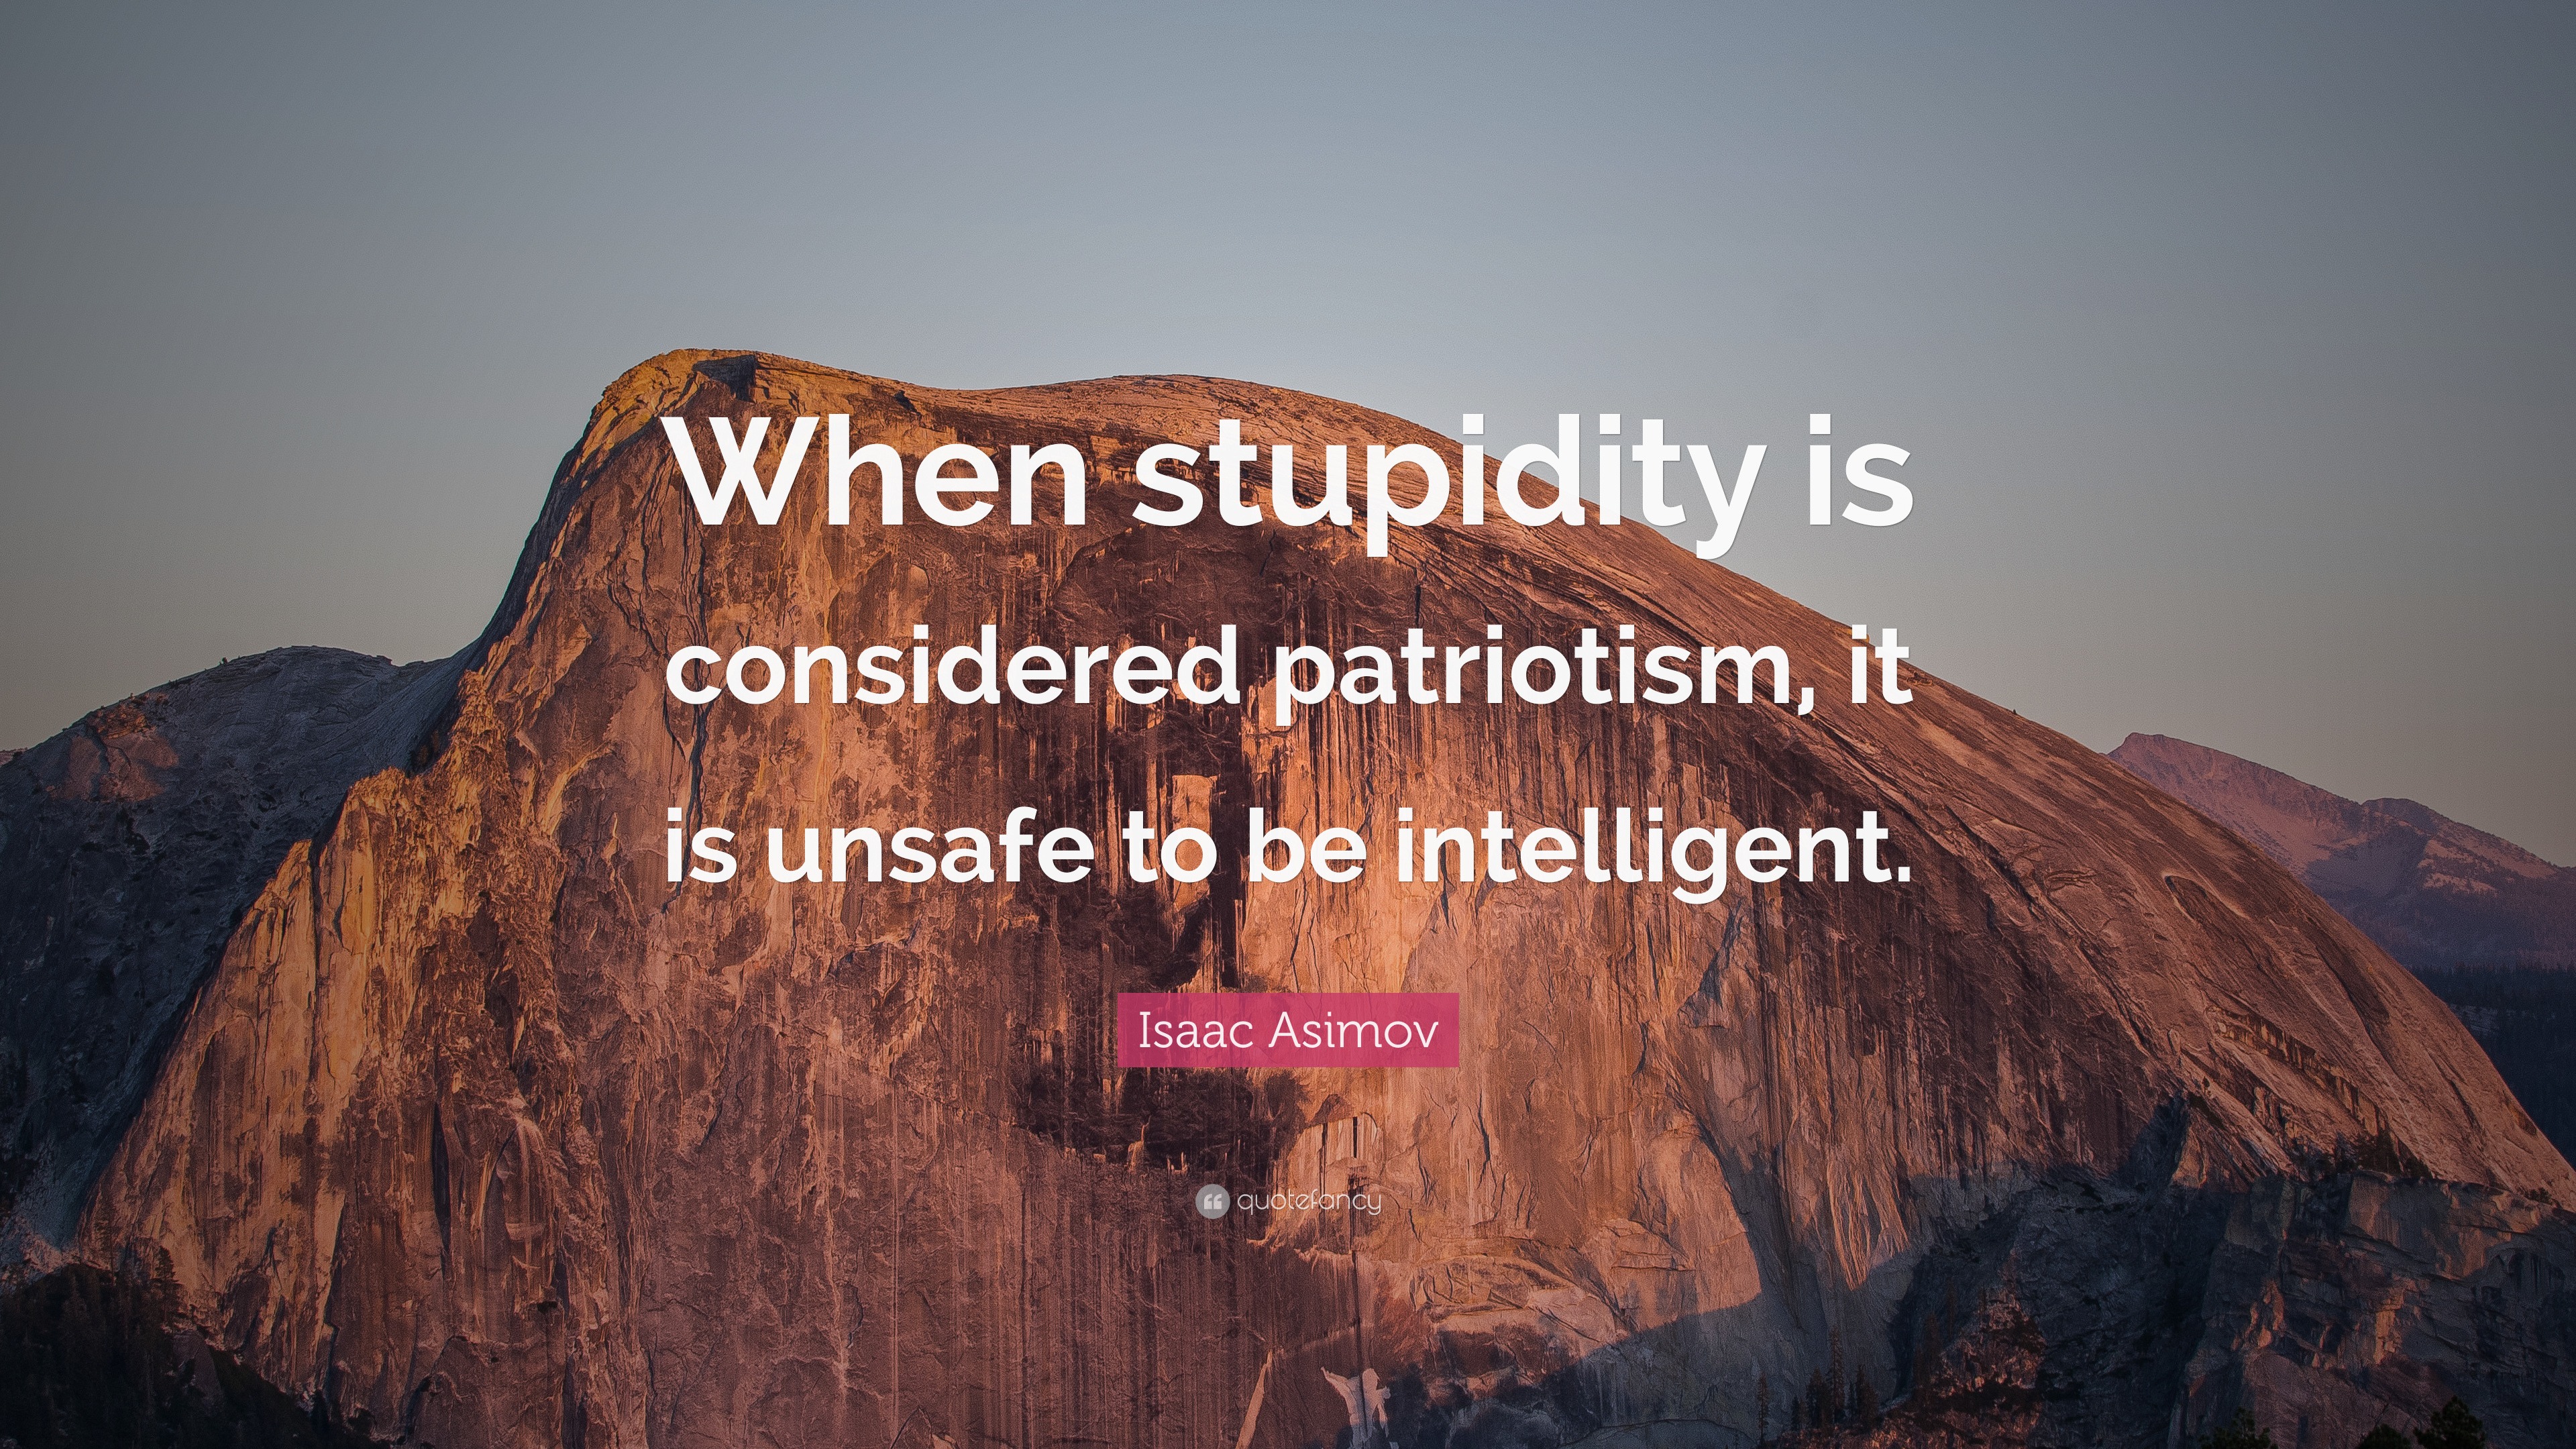 Isaac Asimov Quote: “When stupidity is considered patriotism, it is